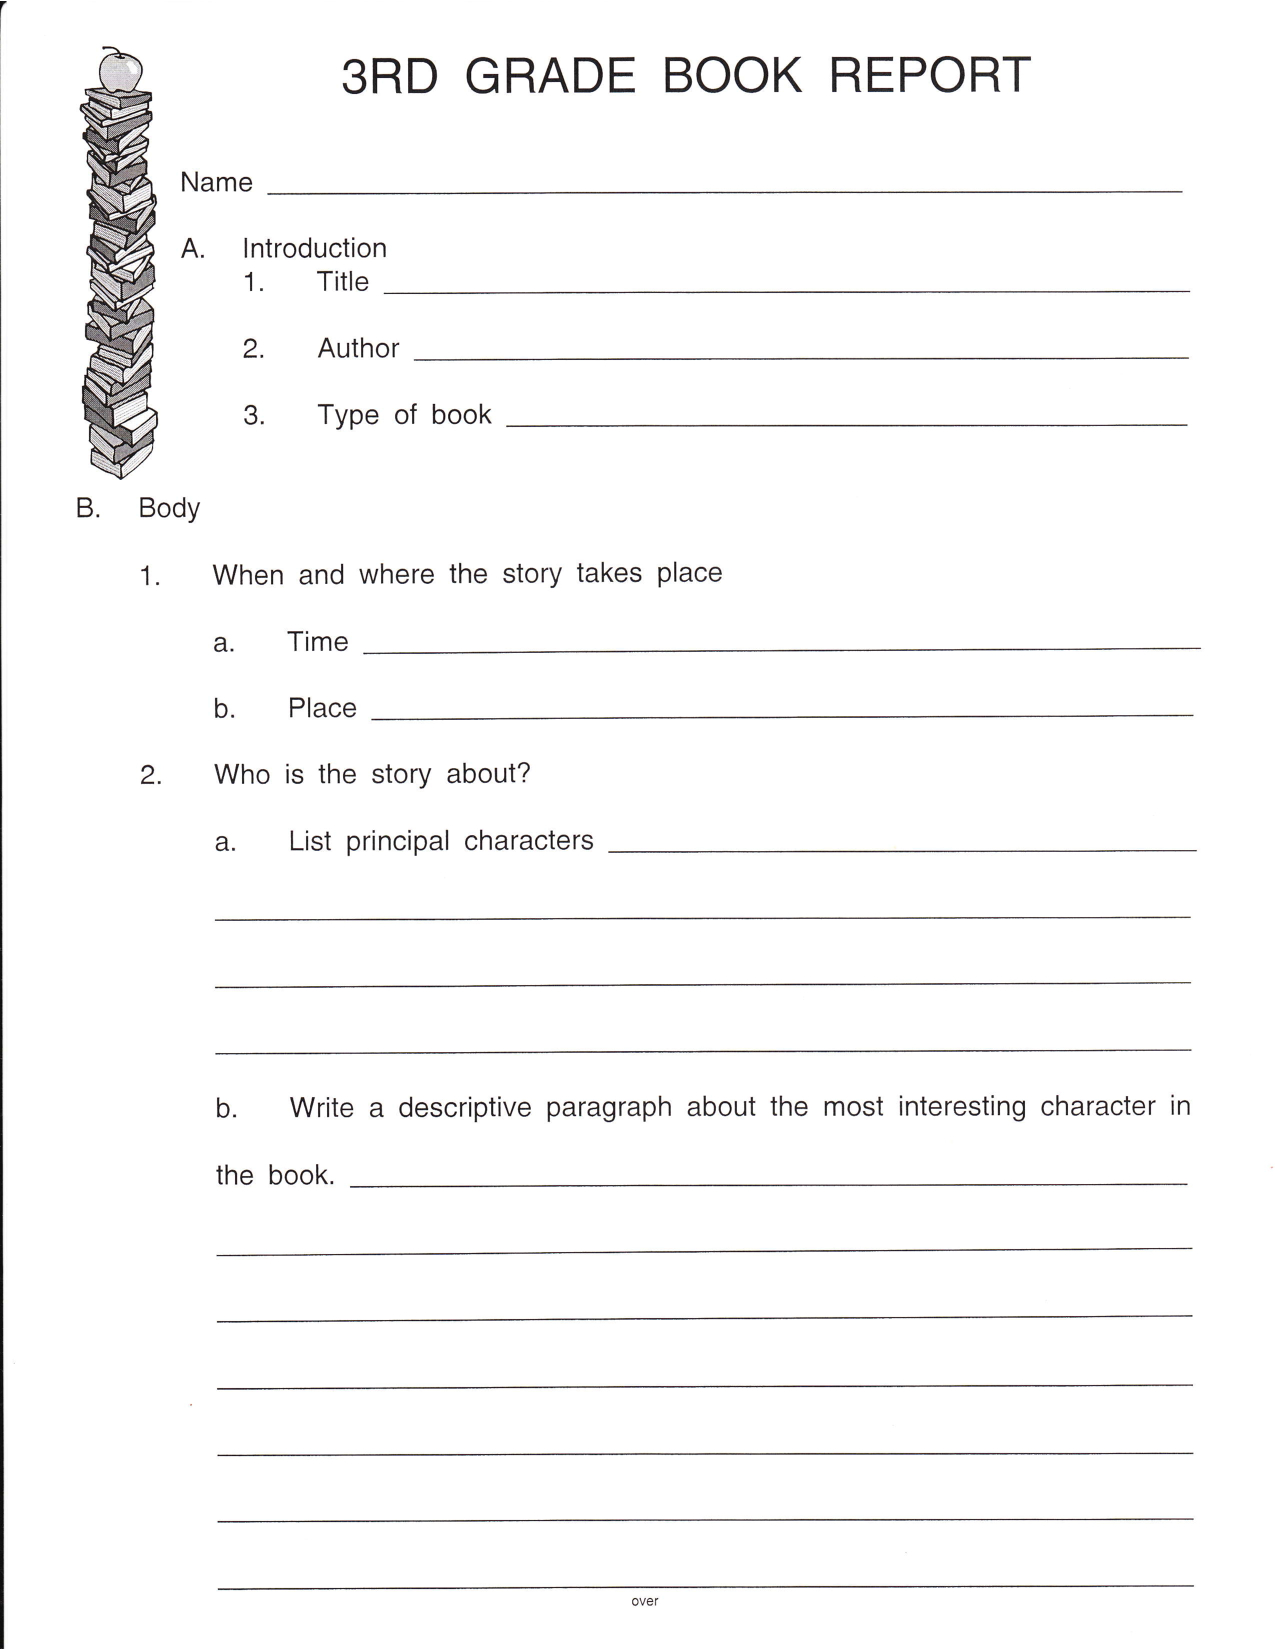 Pinshelena Schweitzer On Classroom Reading | Book Report - Free Printable Story Books For Grade 2